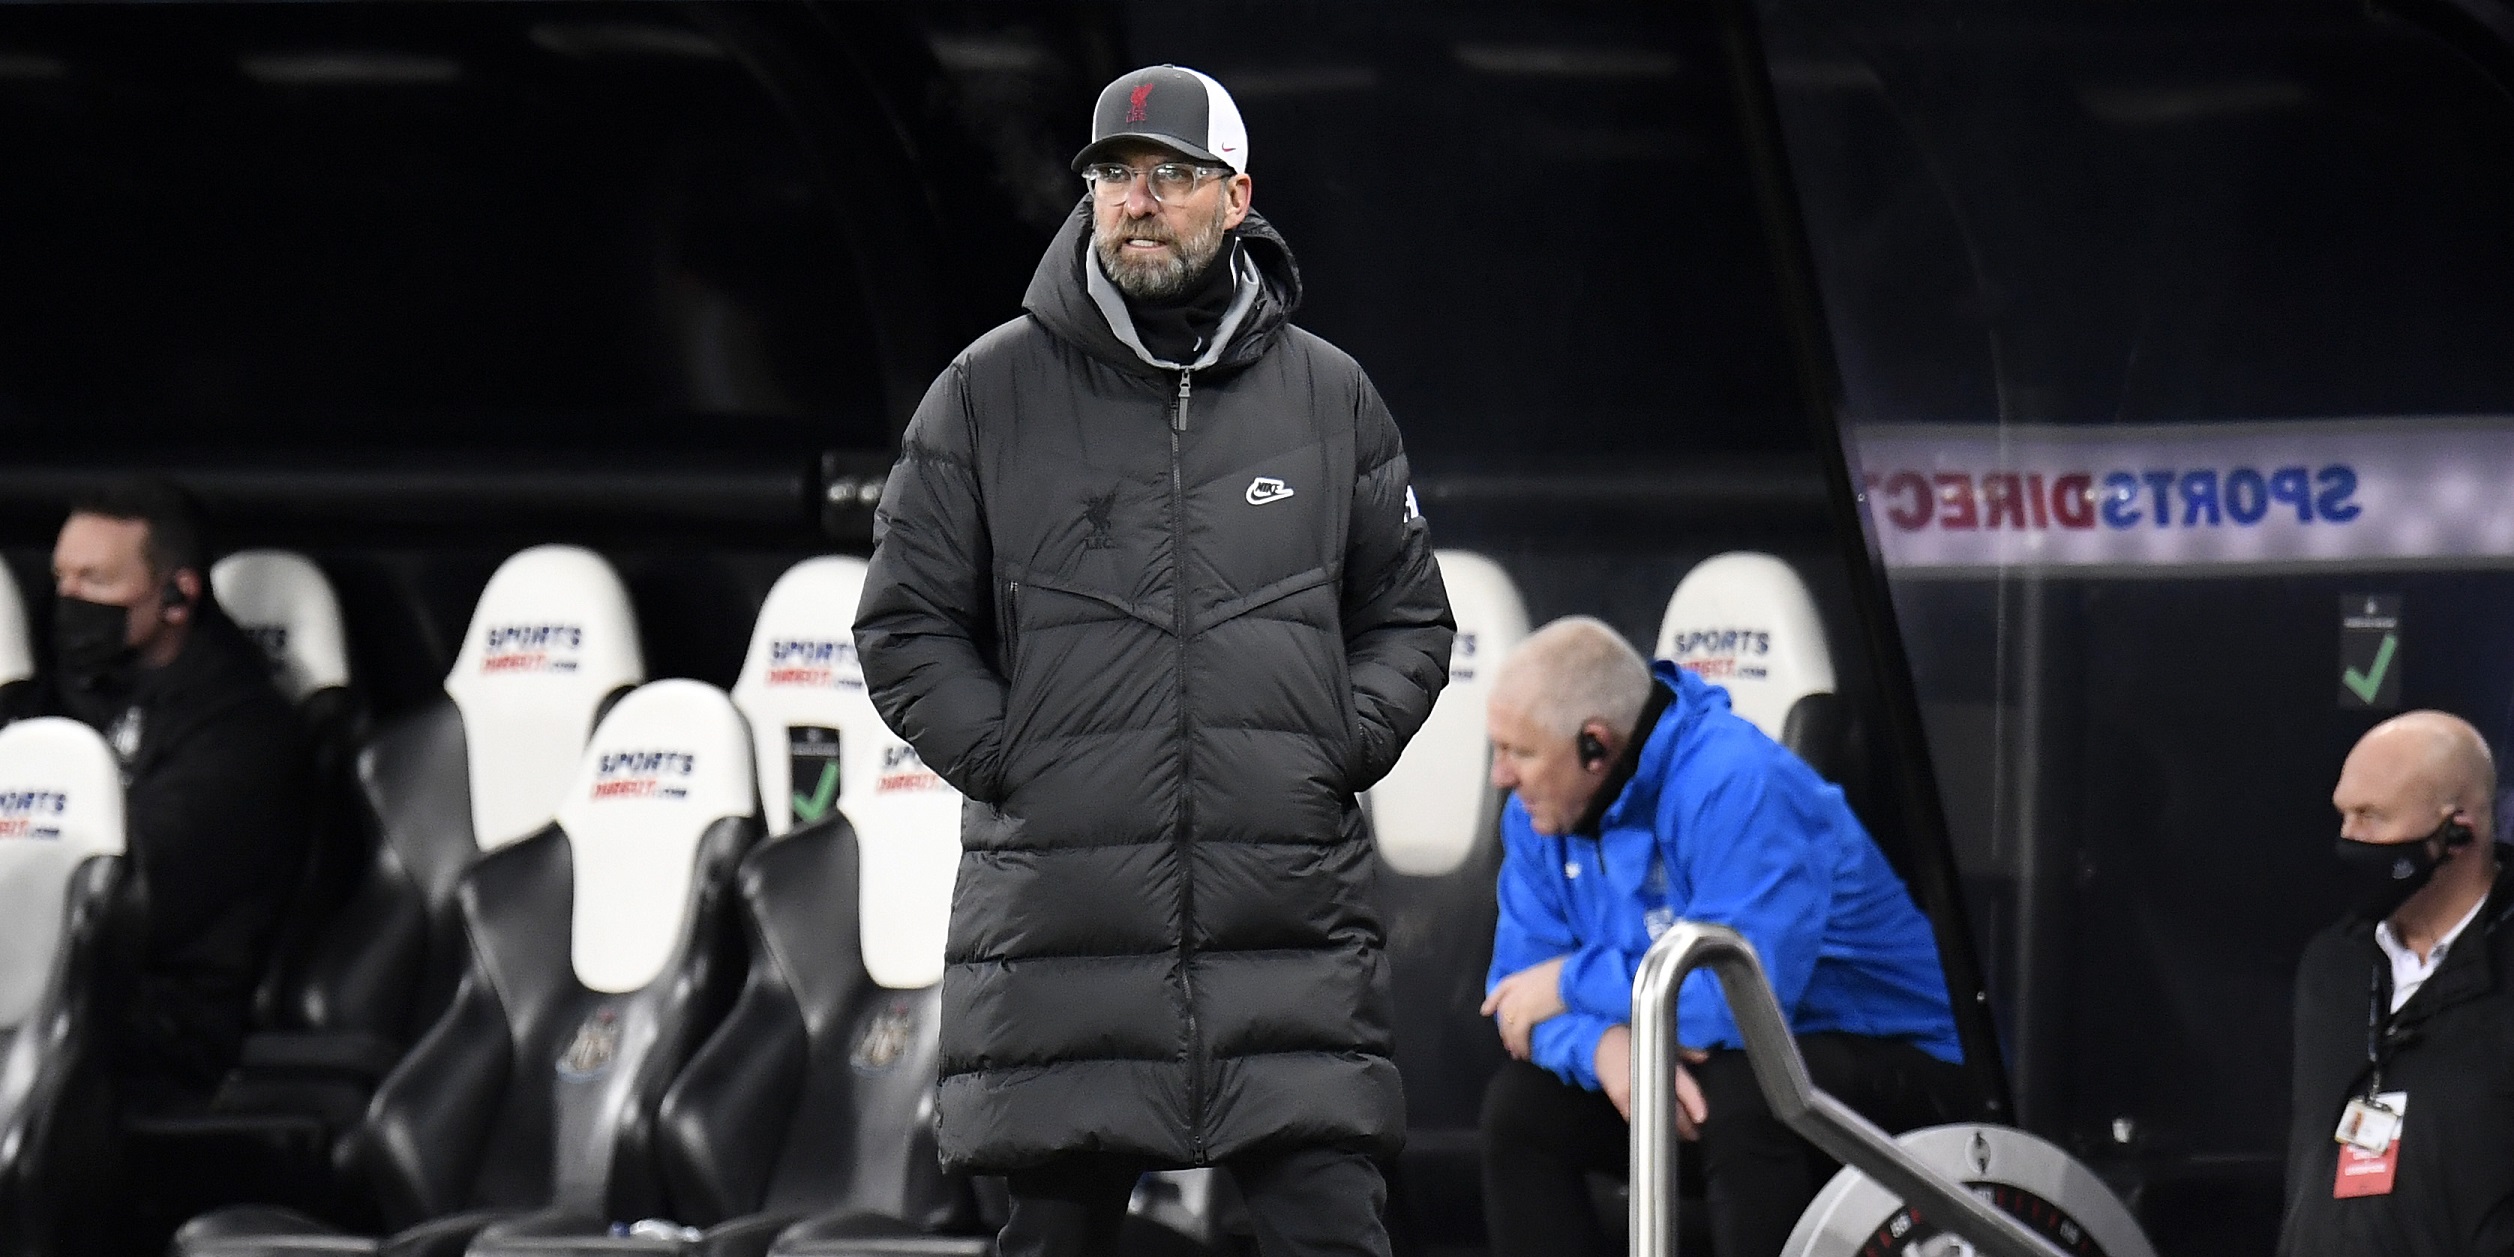 Jurgen Klopp to miss Chelsea match after testing positive for COVID